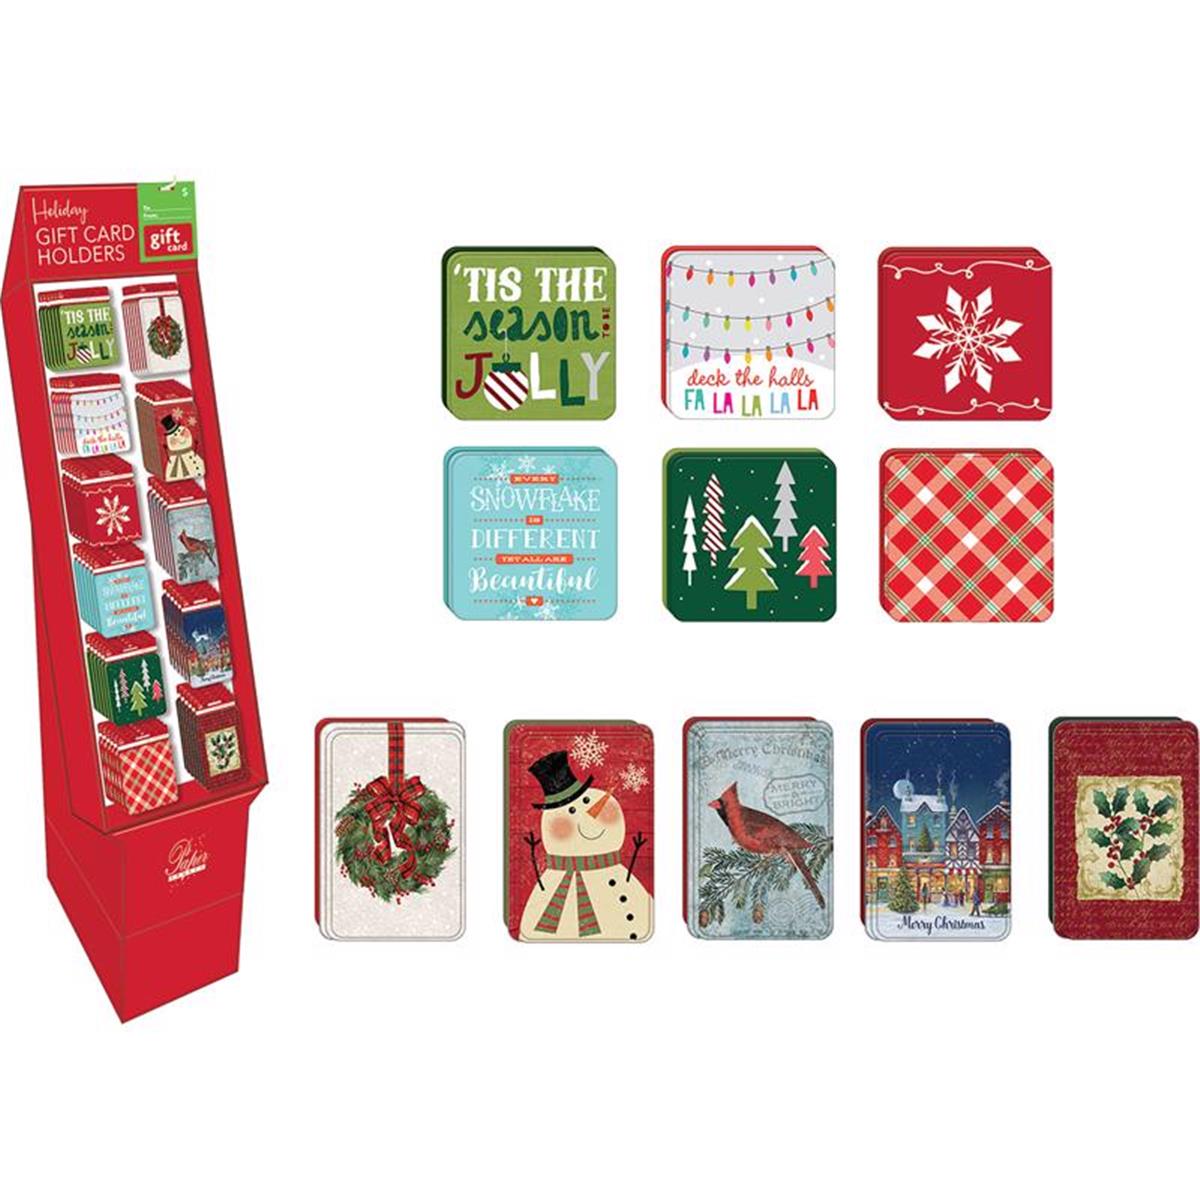 Paper Images 9080310 Christmas Gift Card Holder, MultiColor - Pack of 66